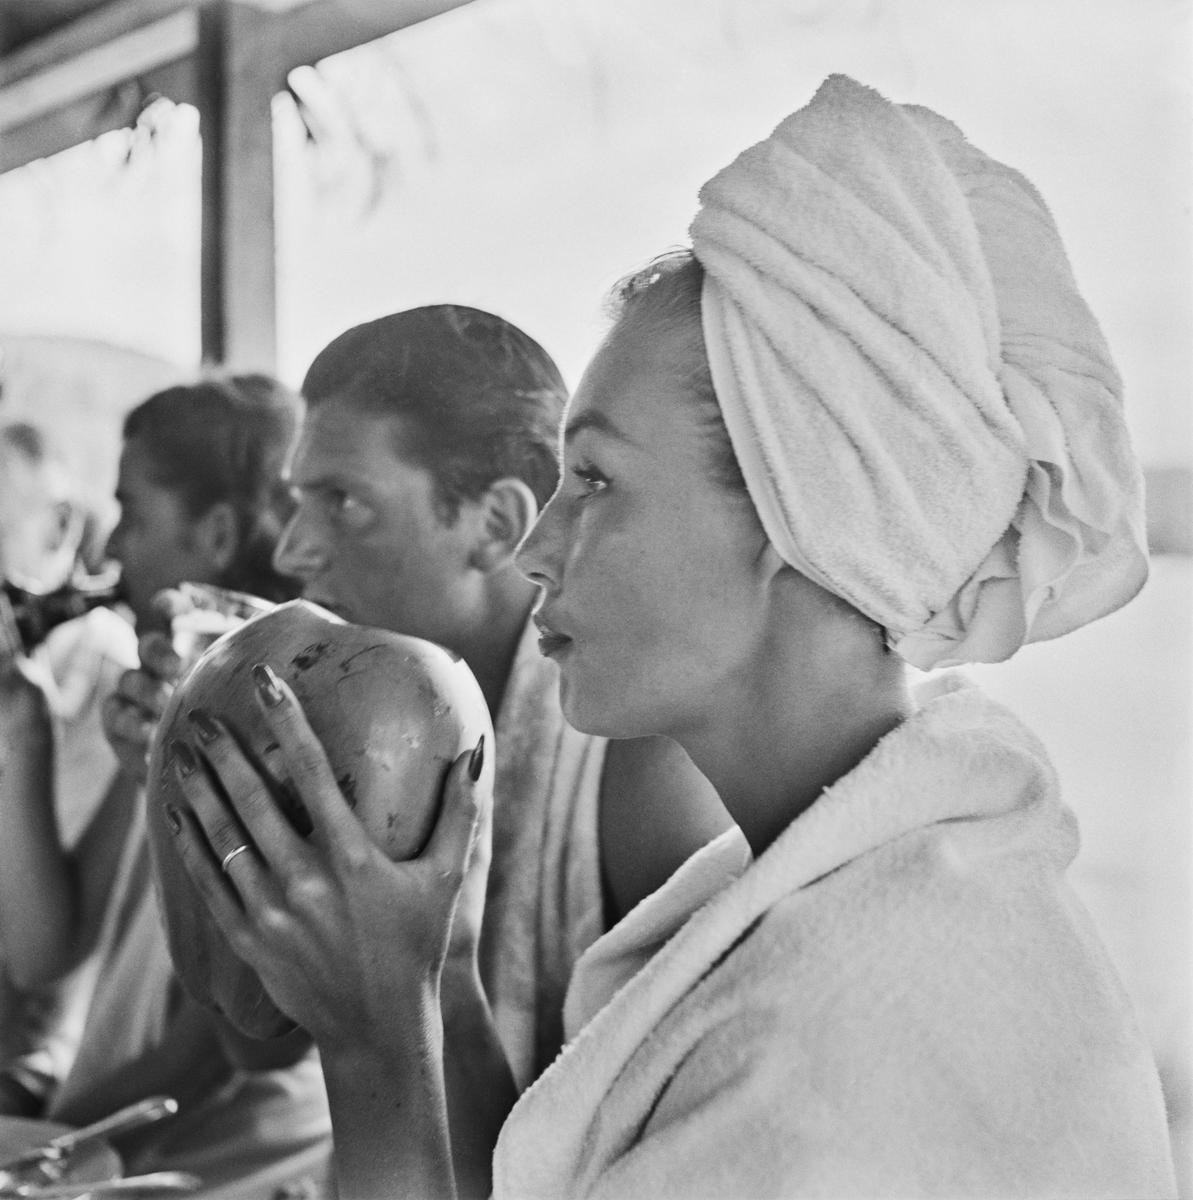 Fashion model Liz Pringle drinking from a coconut at the Round Hill resort, Montego Bay, Jamaica, 1953. 
photo by Slim Aarons 

Slim Aarons silver gelatine fibre based print 
Printed this year 
Slim Aarons Estate Edition 
Produced utilising the only